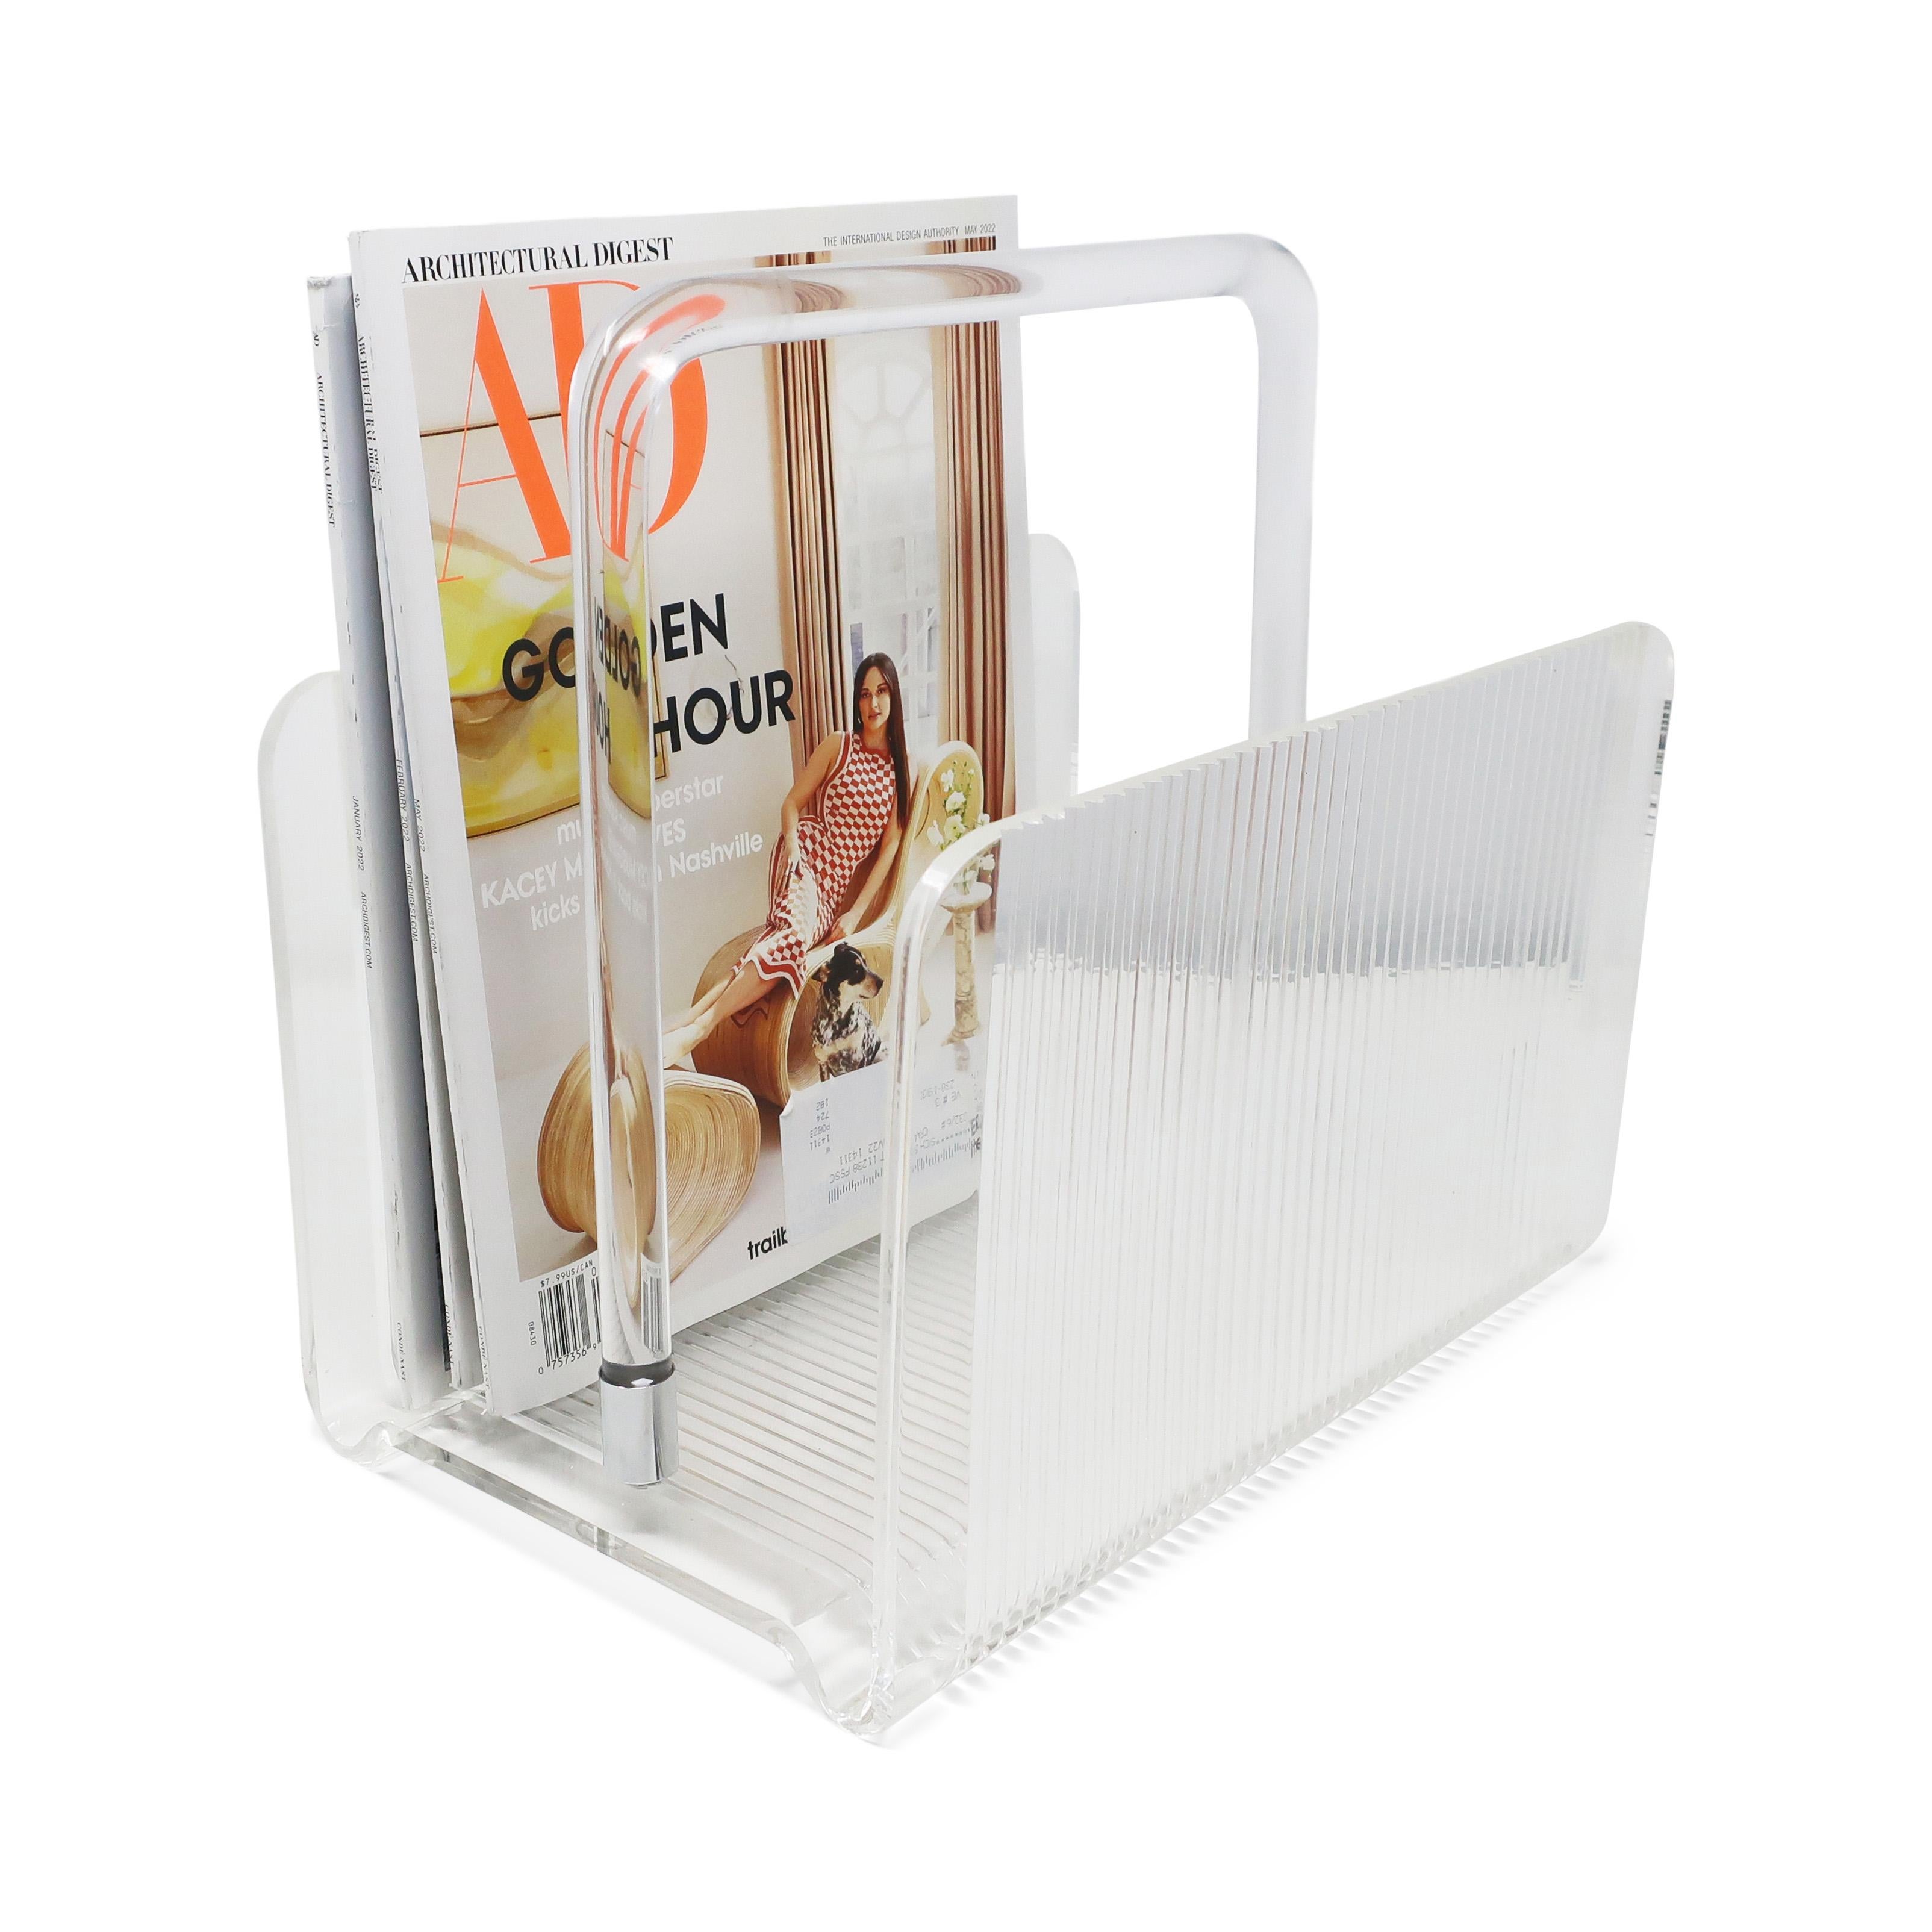 An elegant vintage lucite magazine rack with rounded clear lucite handle. Perfect for storing magazines, books, or records and adding a lovely mid-century modern touch to any living room. In good condition with no maker's mark.

Measures: 8